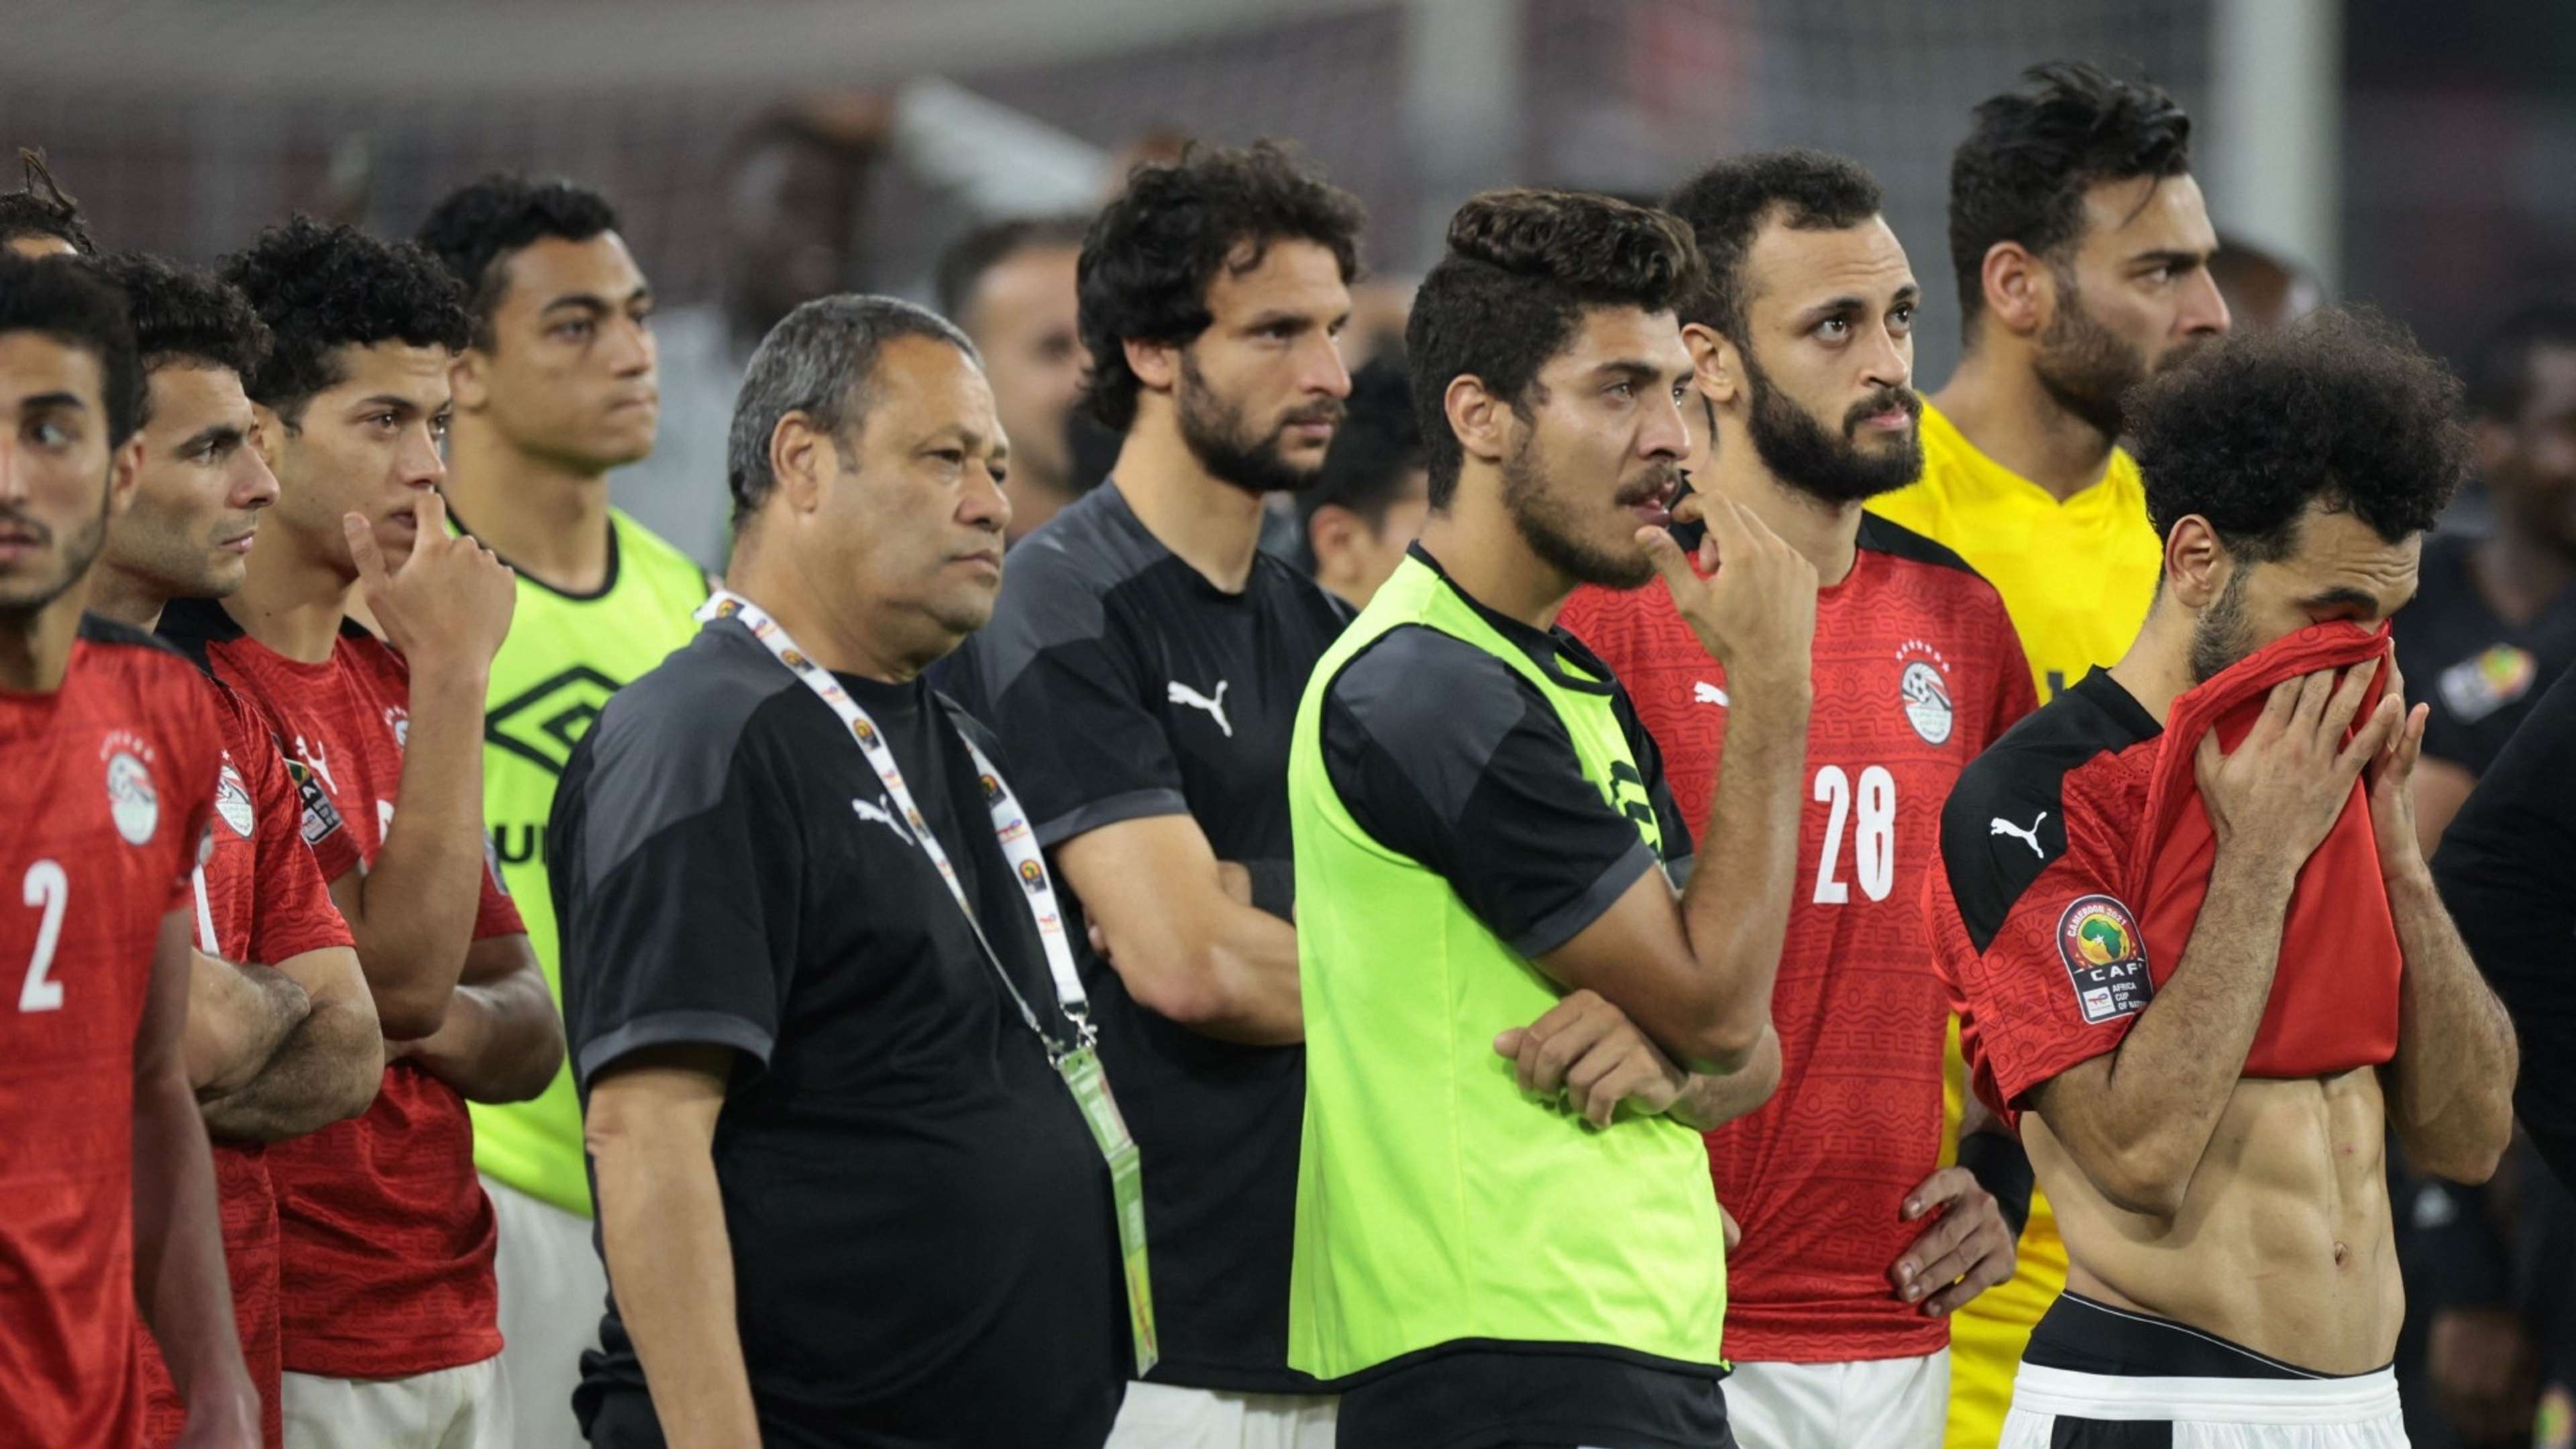 Egypt - Africa Cup of Nations final